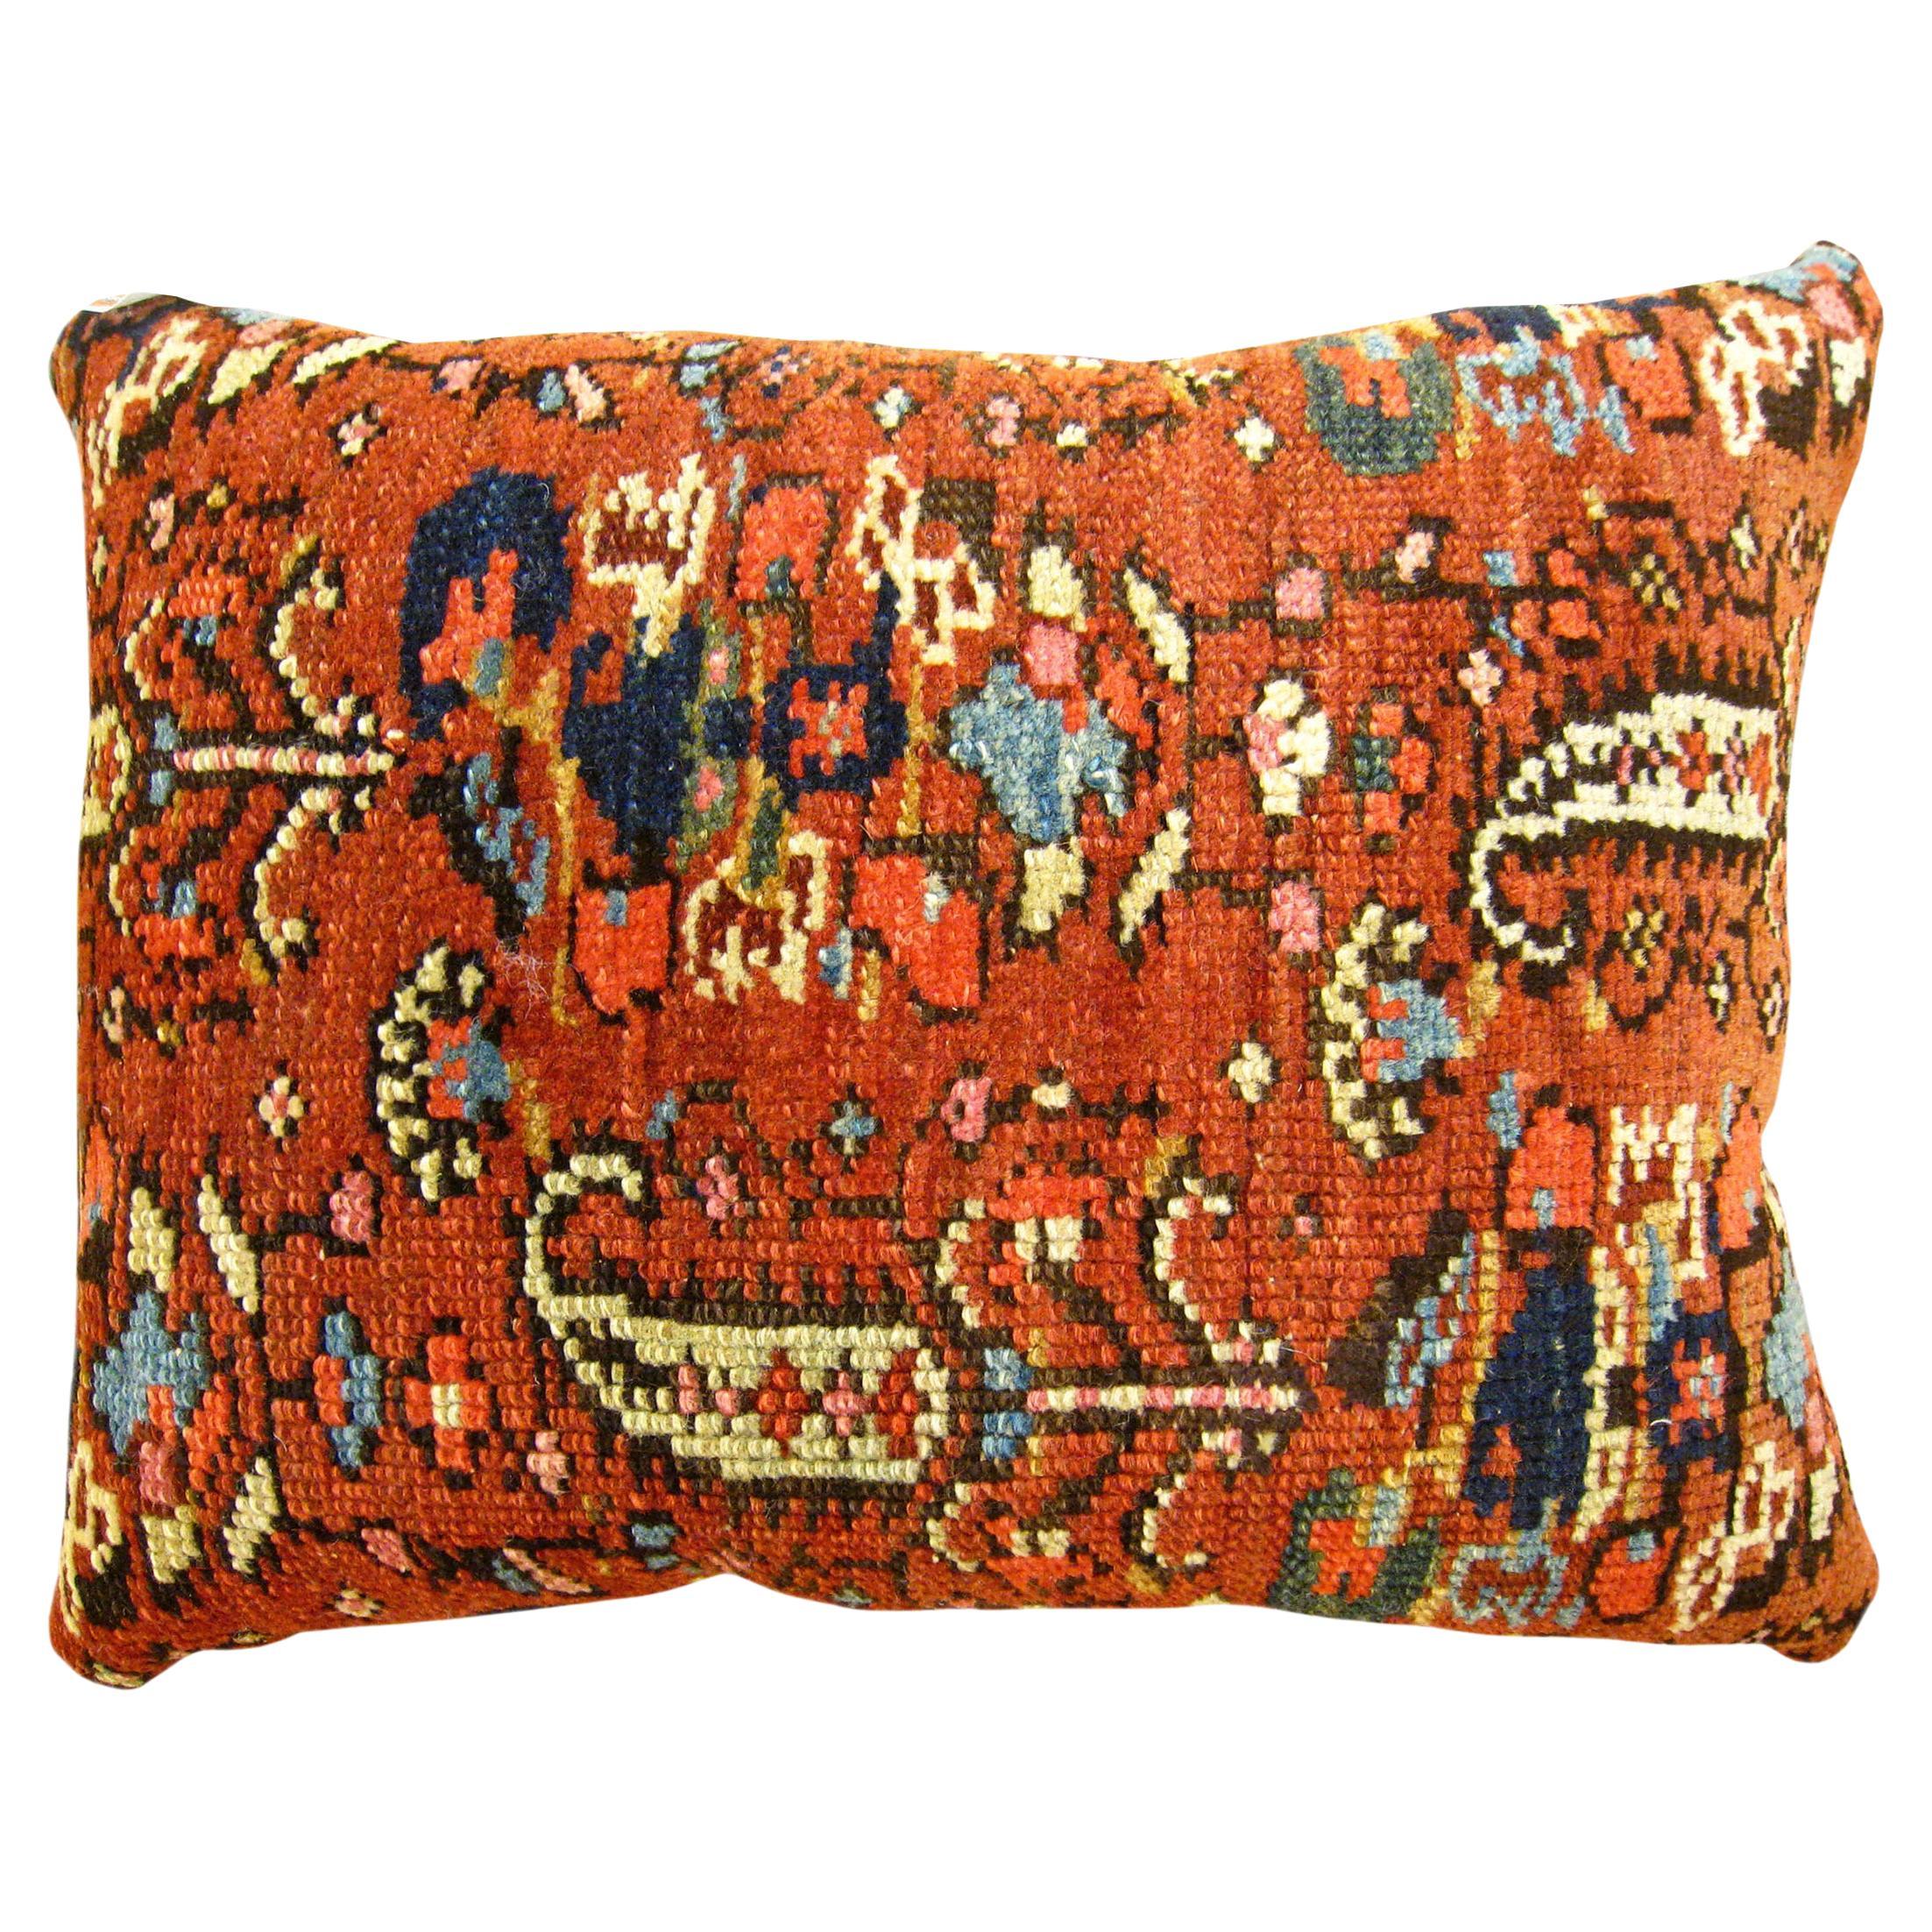 Decorative Antique Persian Malayer Carpet Pillow with Geometric Abstracts Design For Sale